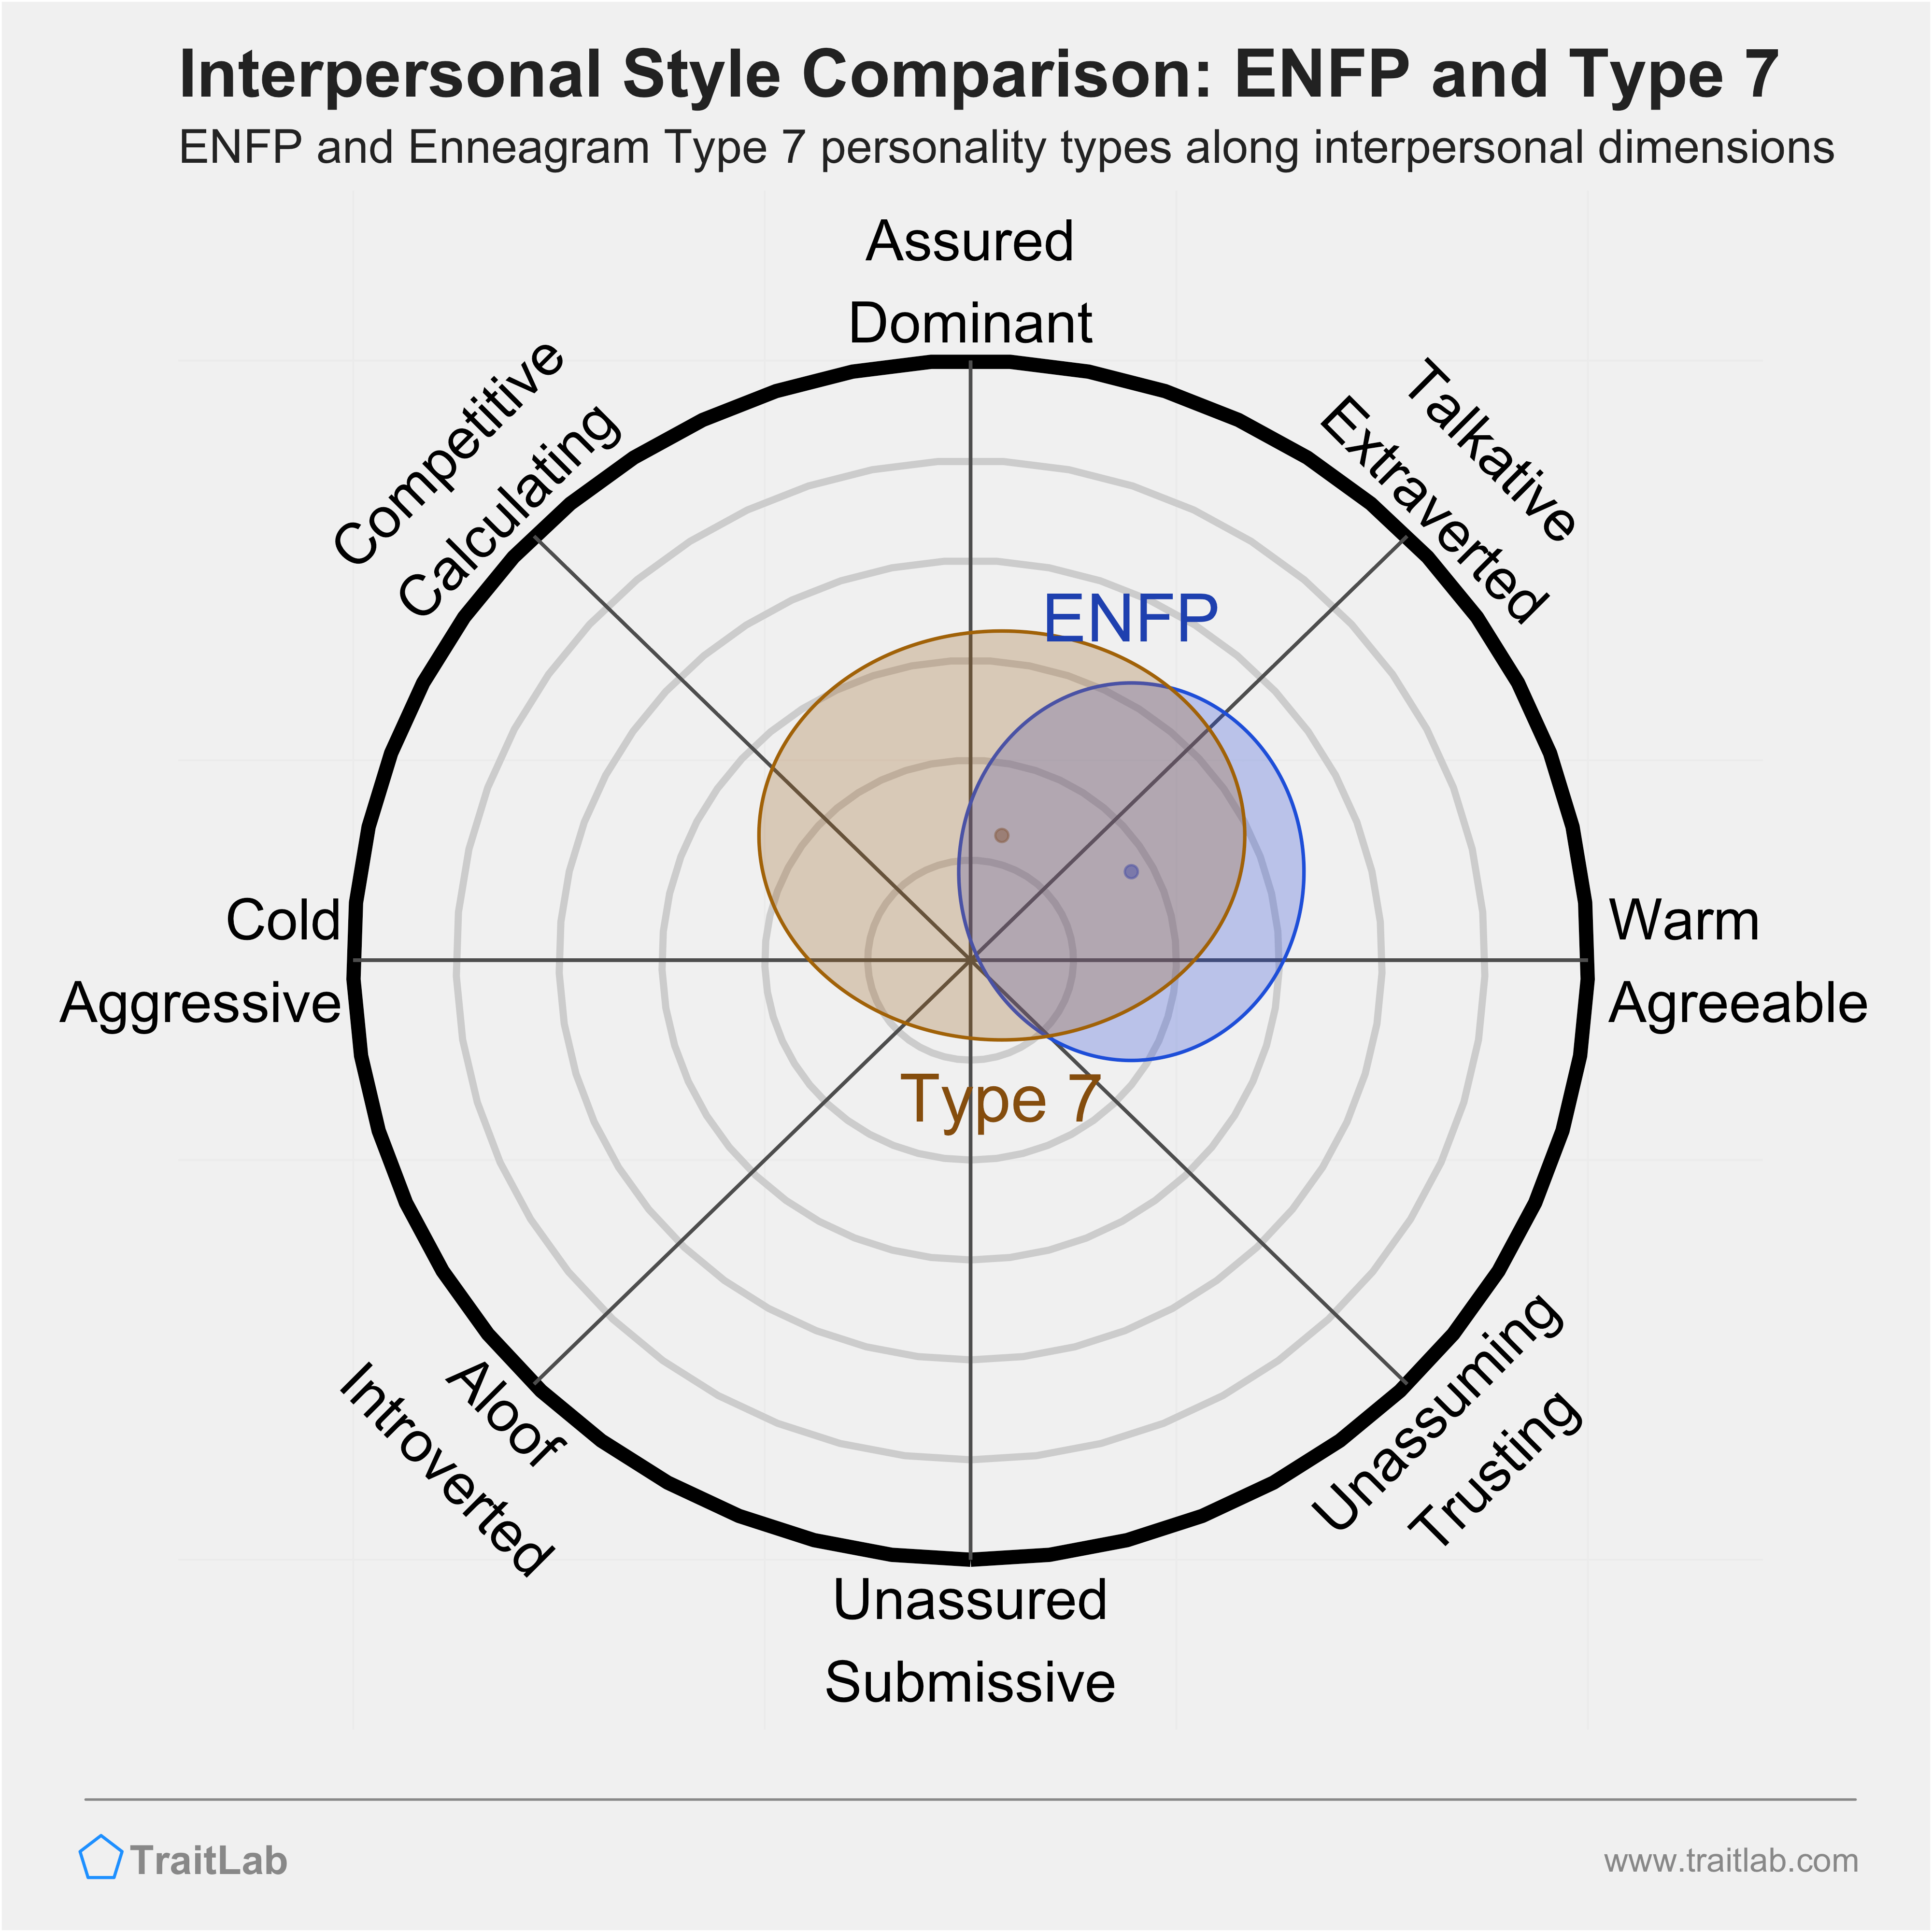 Enneagram ENFP and Type 7 comparison across interpersonal dimensions